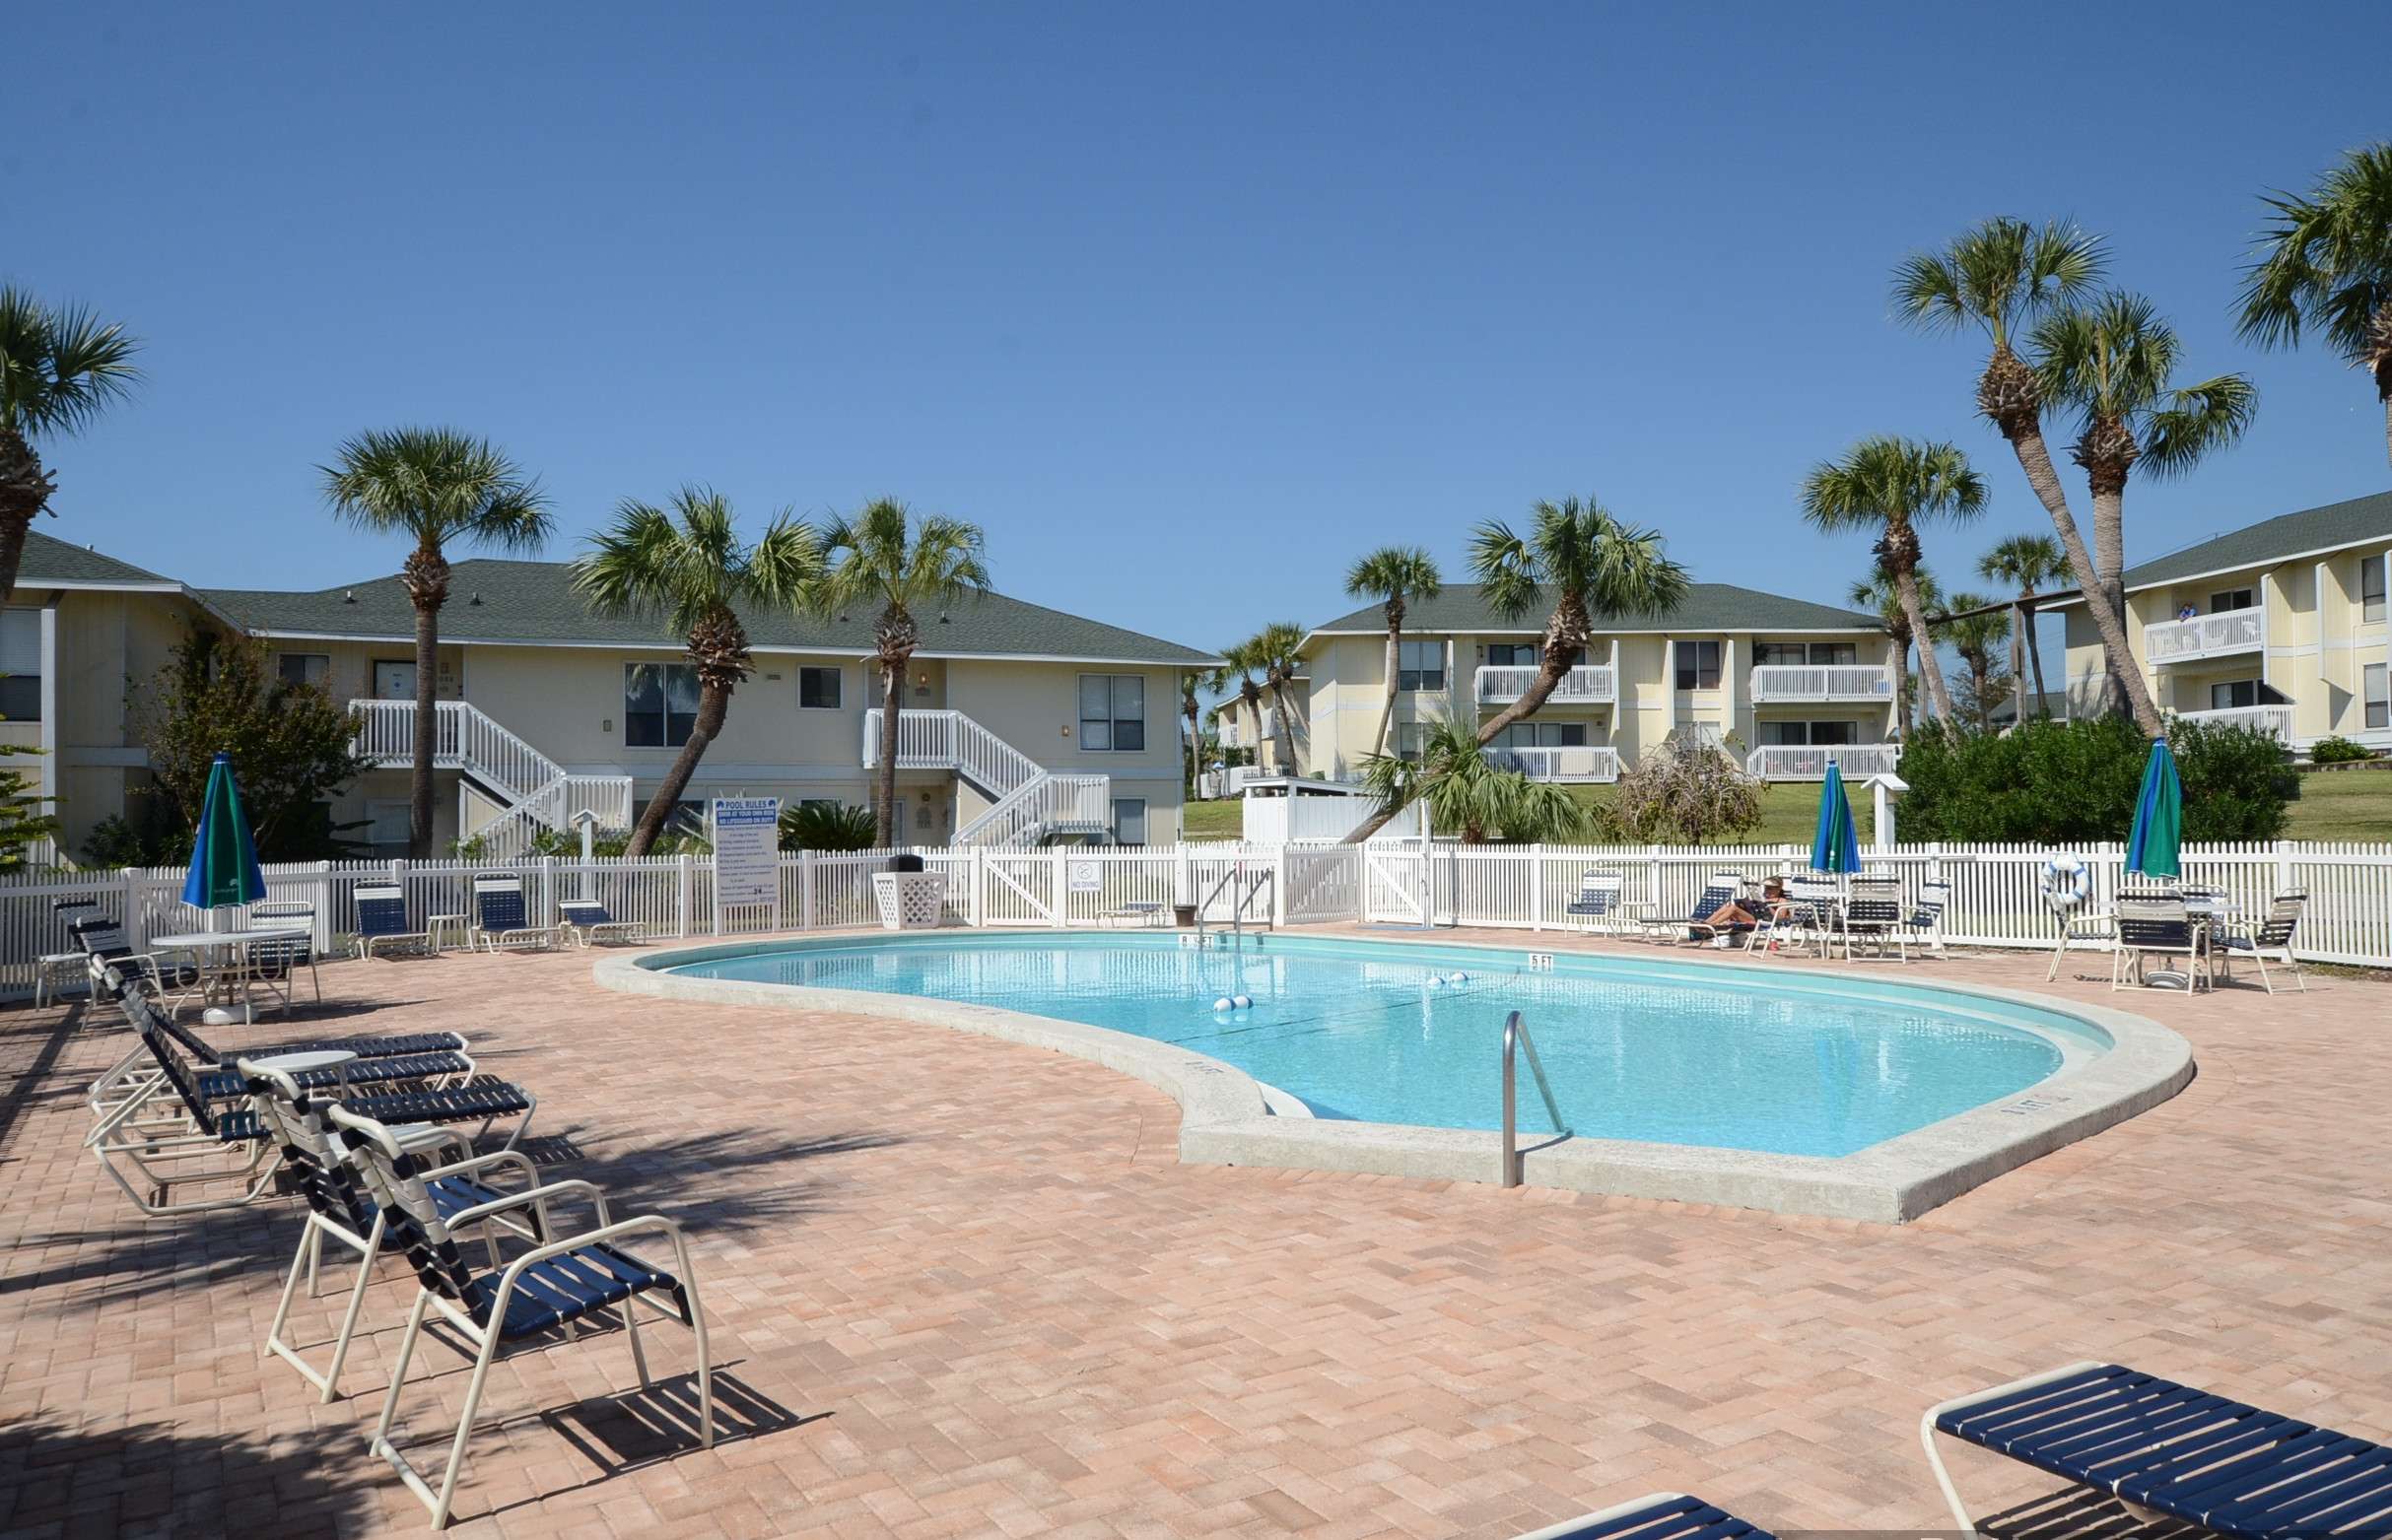 Sandpiper Cove, 9103: Place To Stay On Vacation 2 Bedroom ...